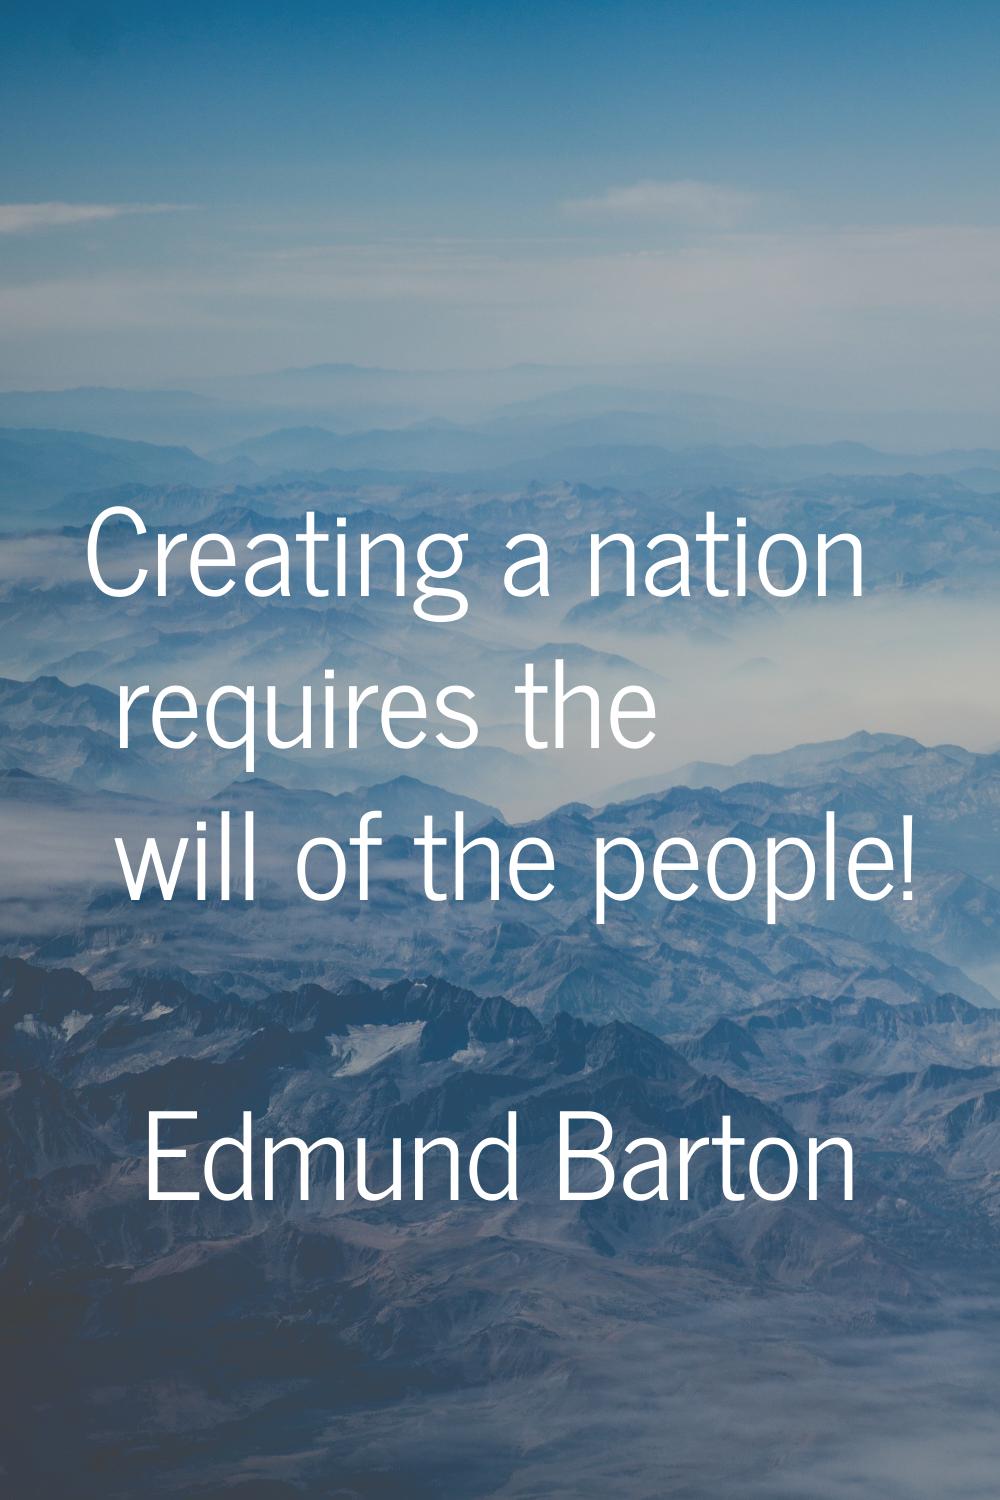 Creating a nation requires the will of the people!